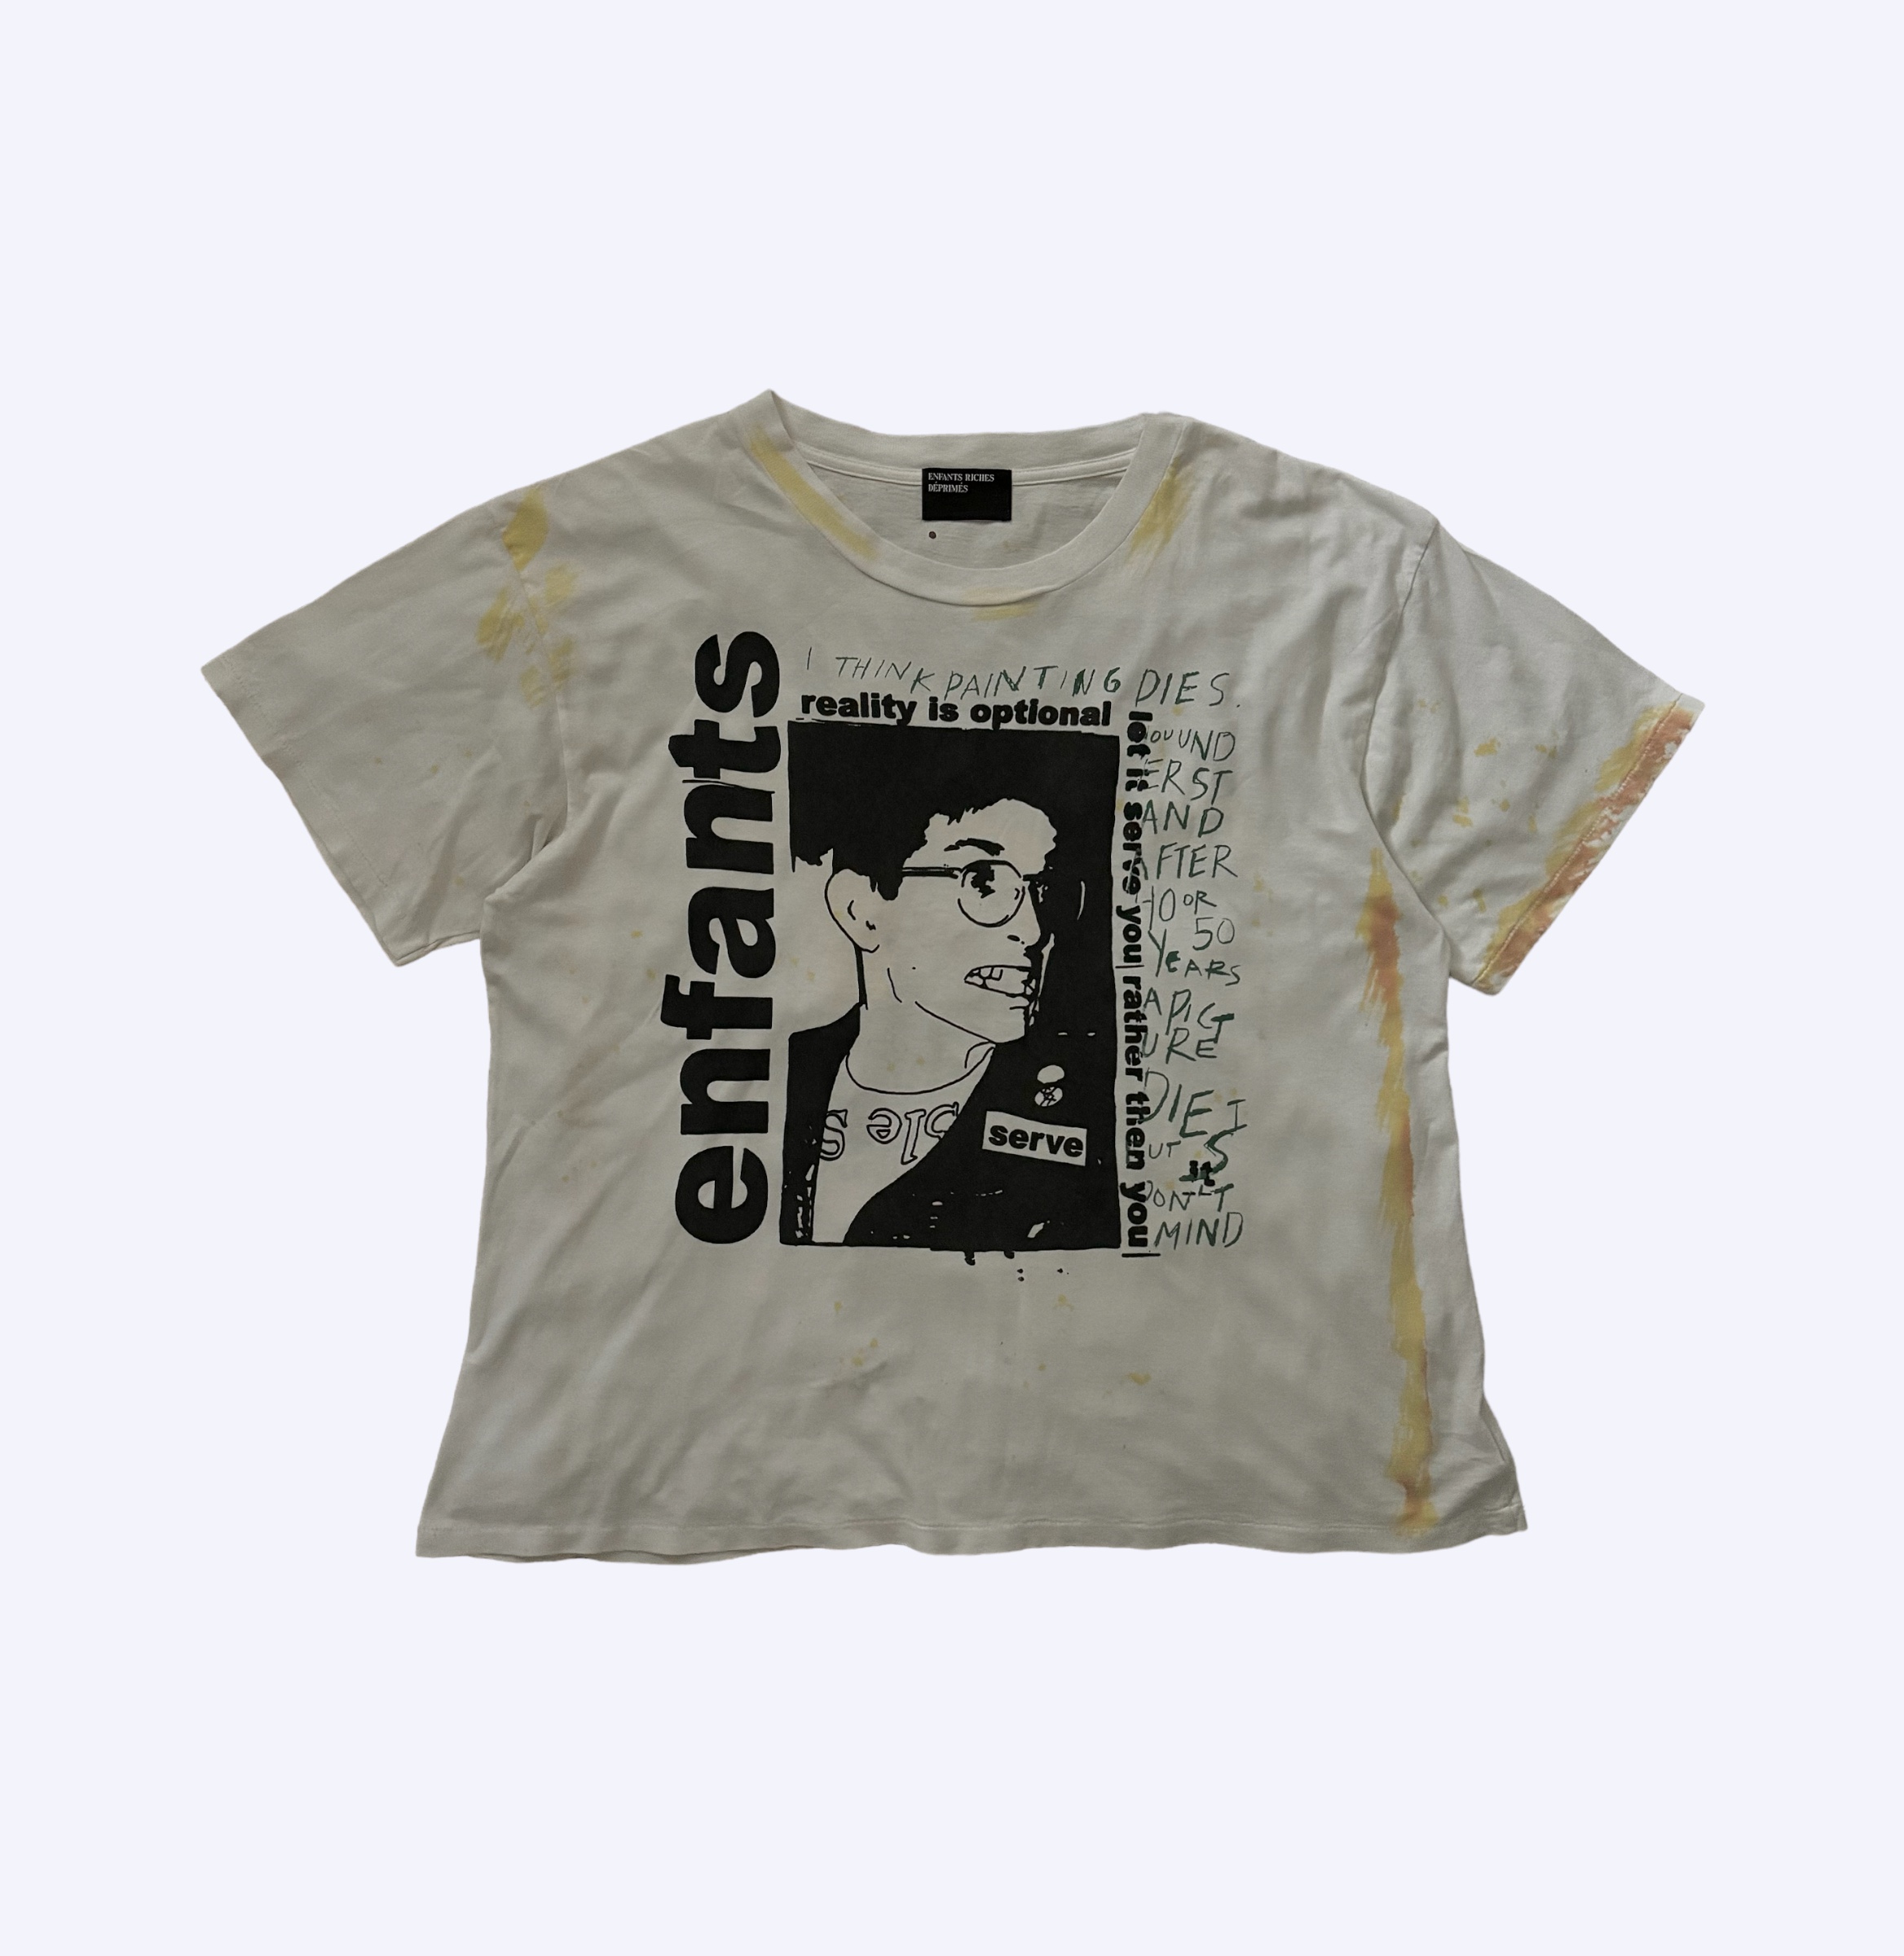 Enfants Riches Deprimes “Reality Is Optional” Tee